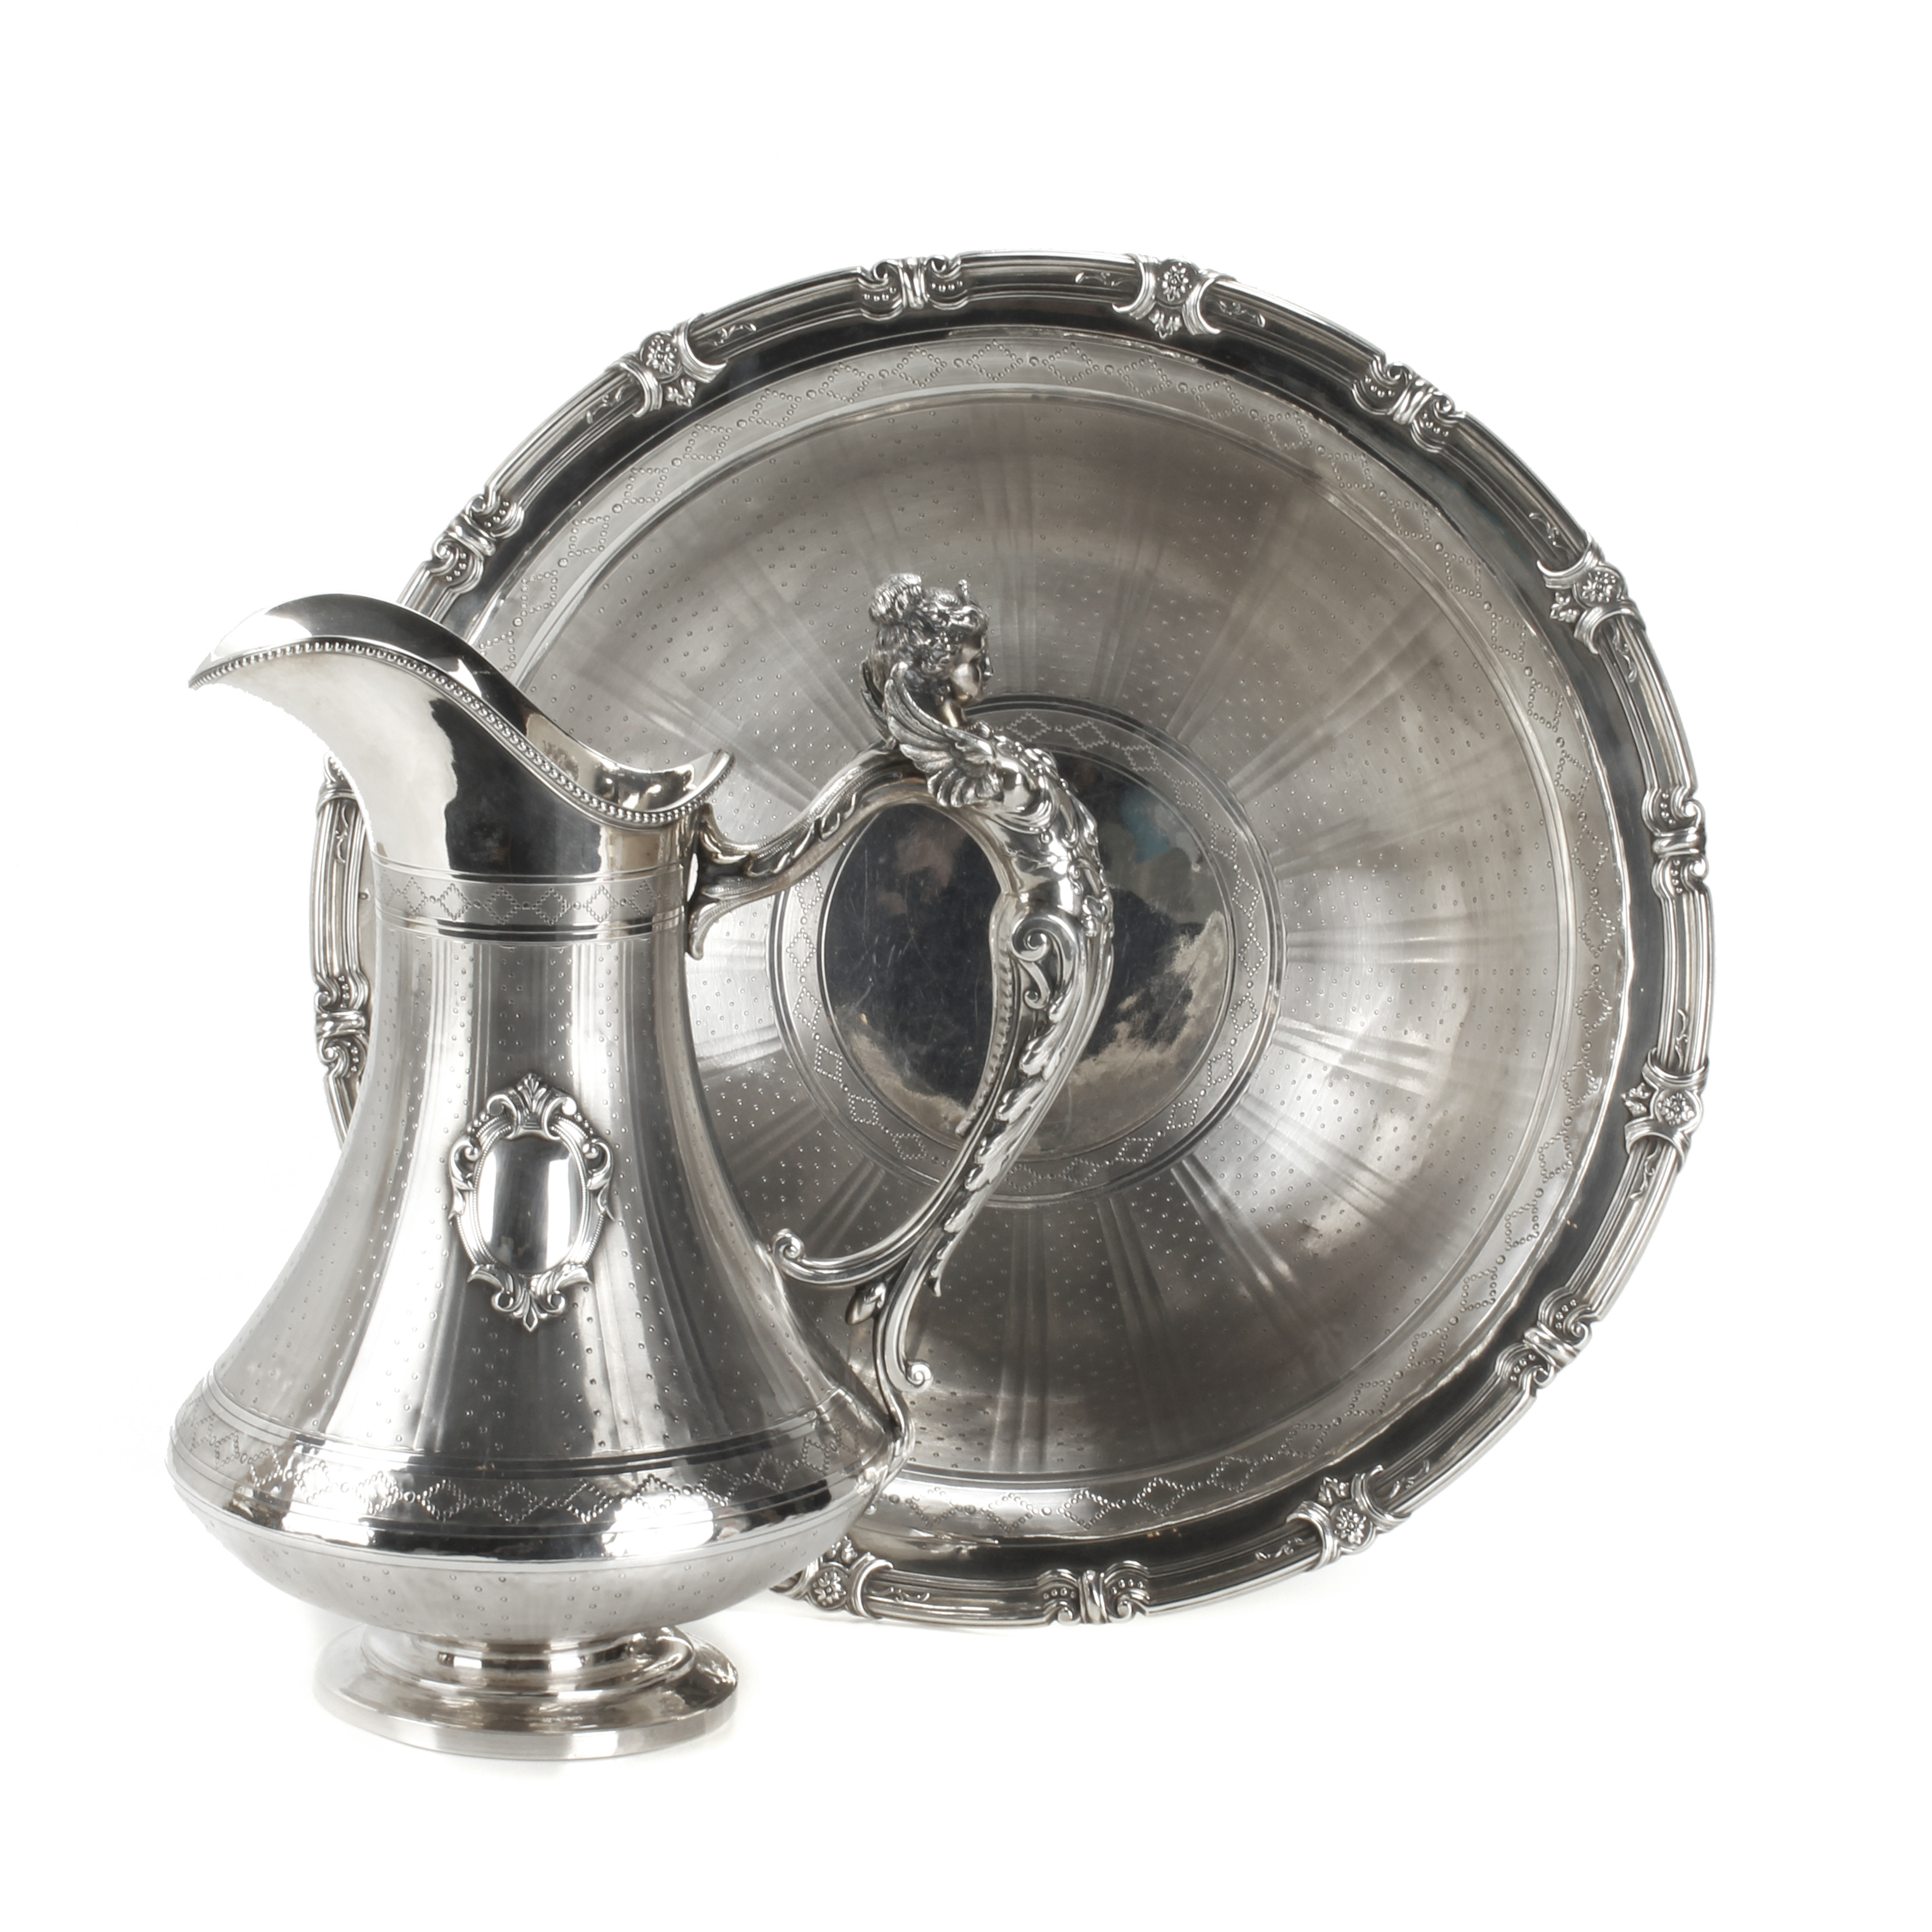 FRENCH SILVER JUG AND BASIN, SECOND HALF 19TH CENTURY.